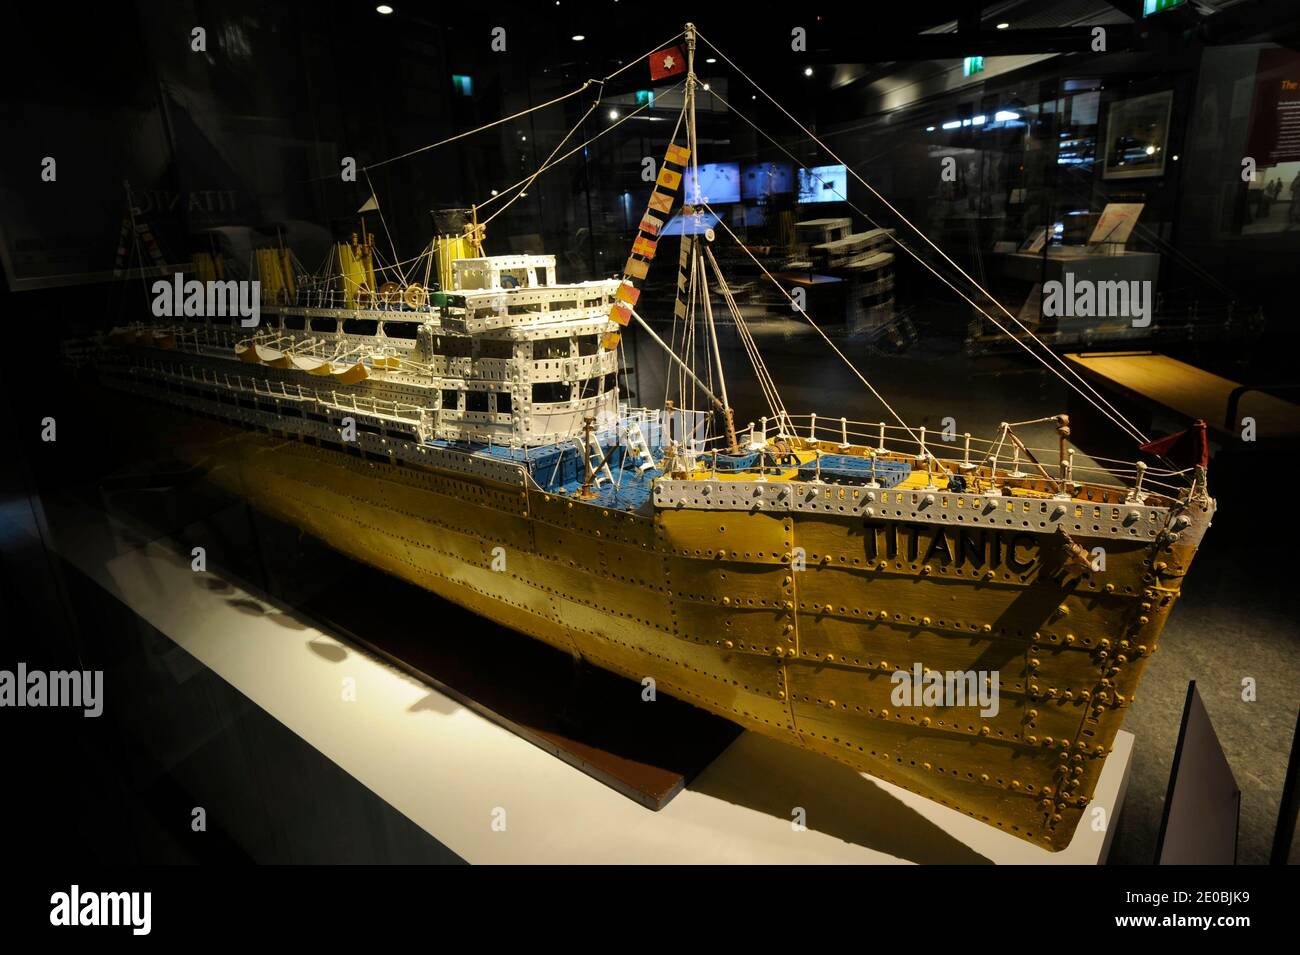 Titanic model made by a Meccano enthusiast in England in the late twentieth century on display at the TITANICa exhibition at the Transport Museum in Belfast, UK in March 2012. It's just one of thousands of Titanic models that have been created all over the world by people fascinated with the ill-fated ship. Photo by David Lefranc/ABACAPRESS.COM Stock Photo